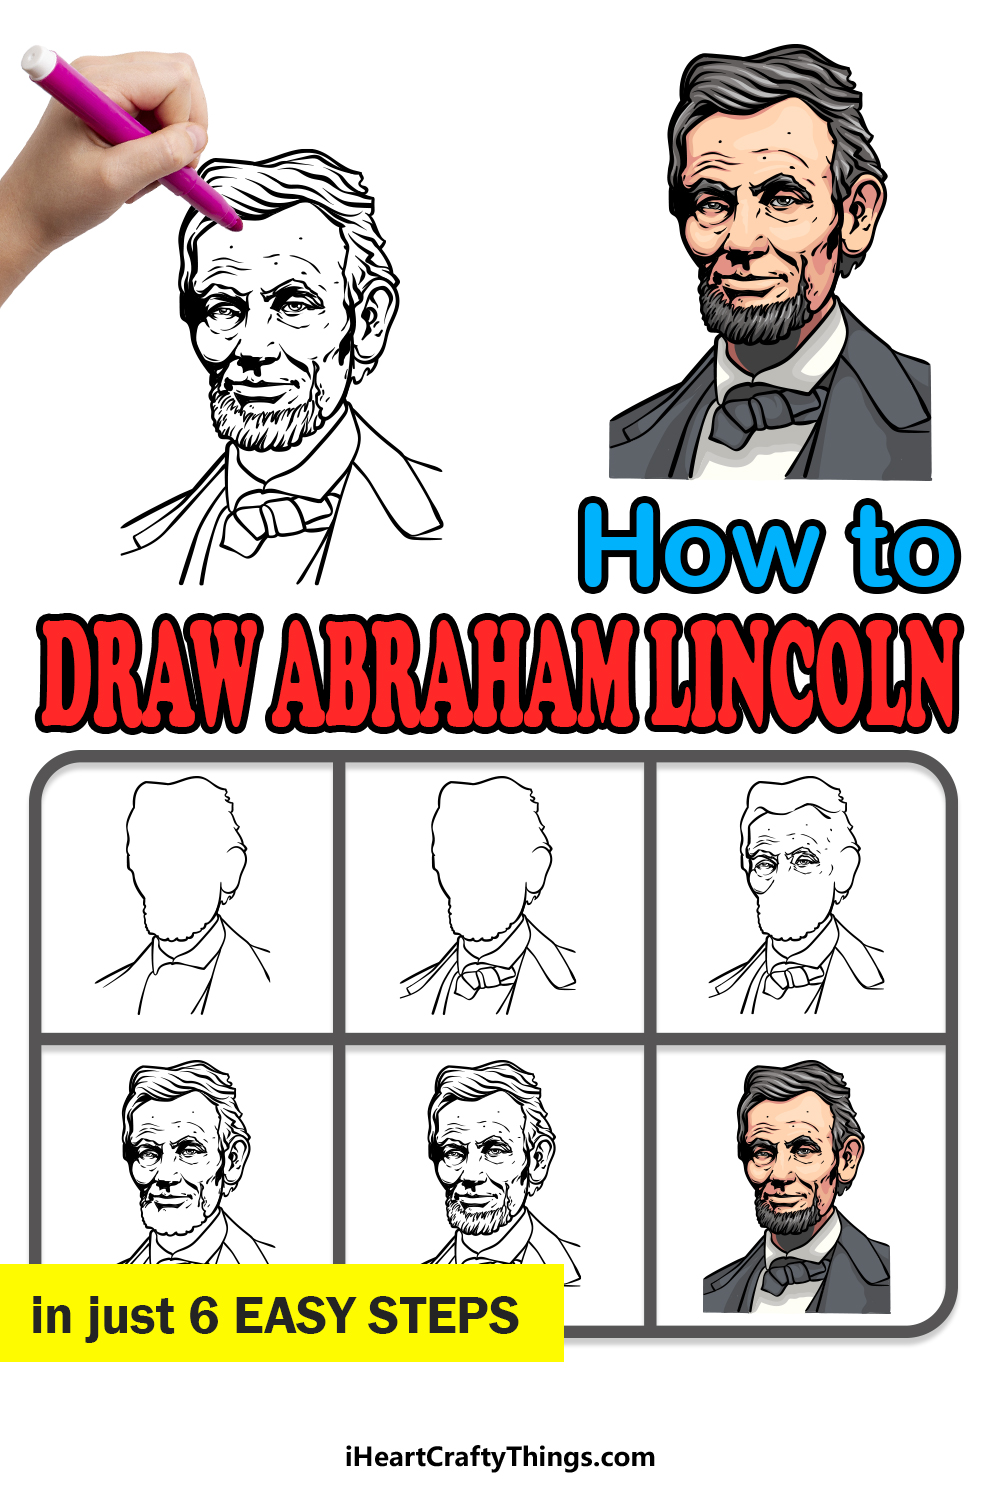 how to draw Abraham Lincoln in 6 easy steps